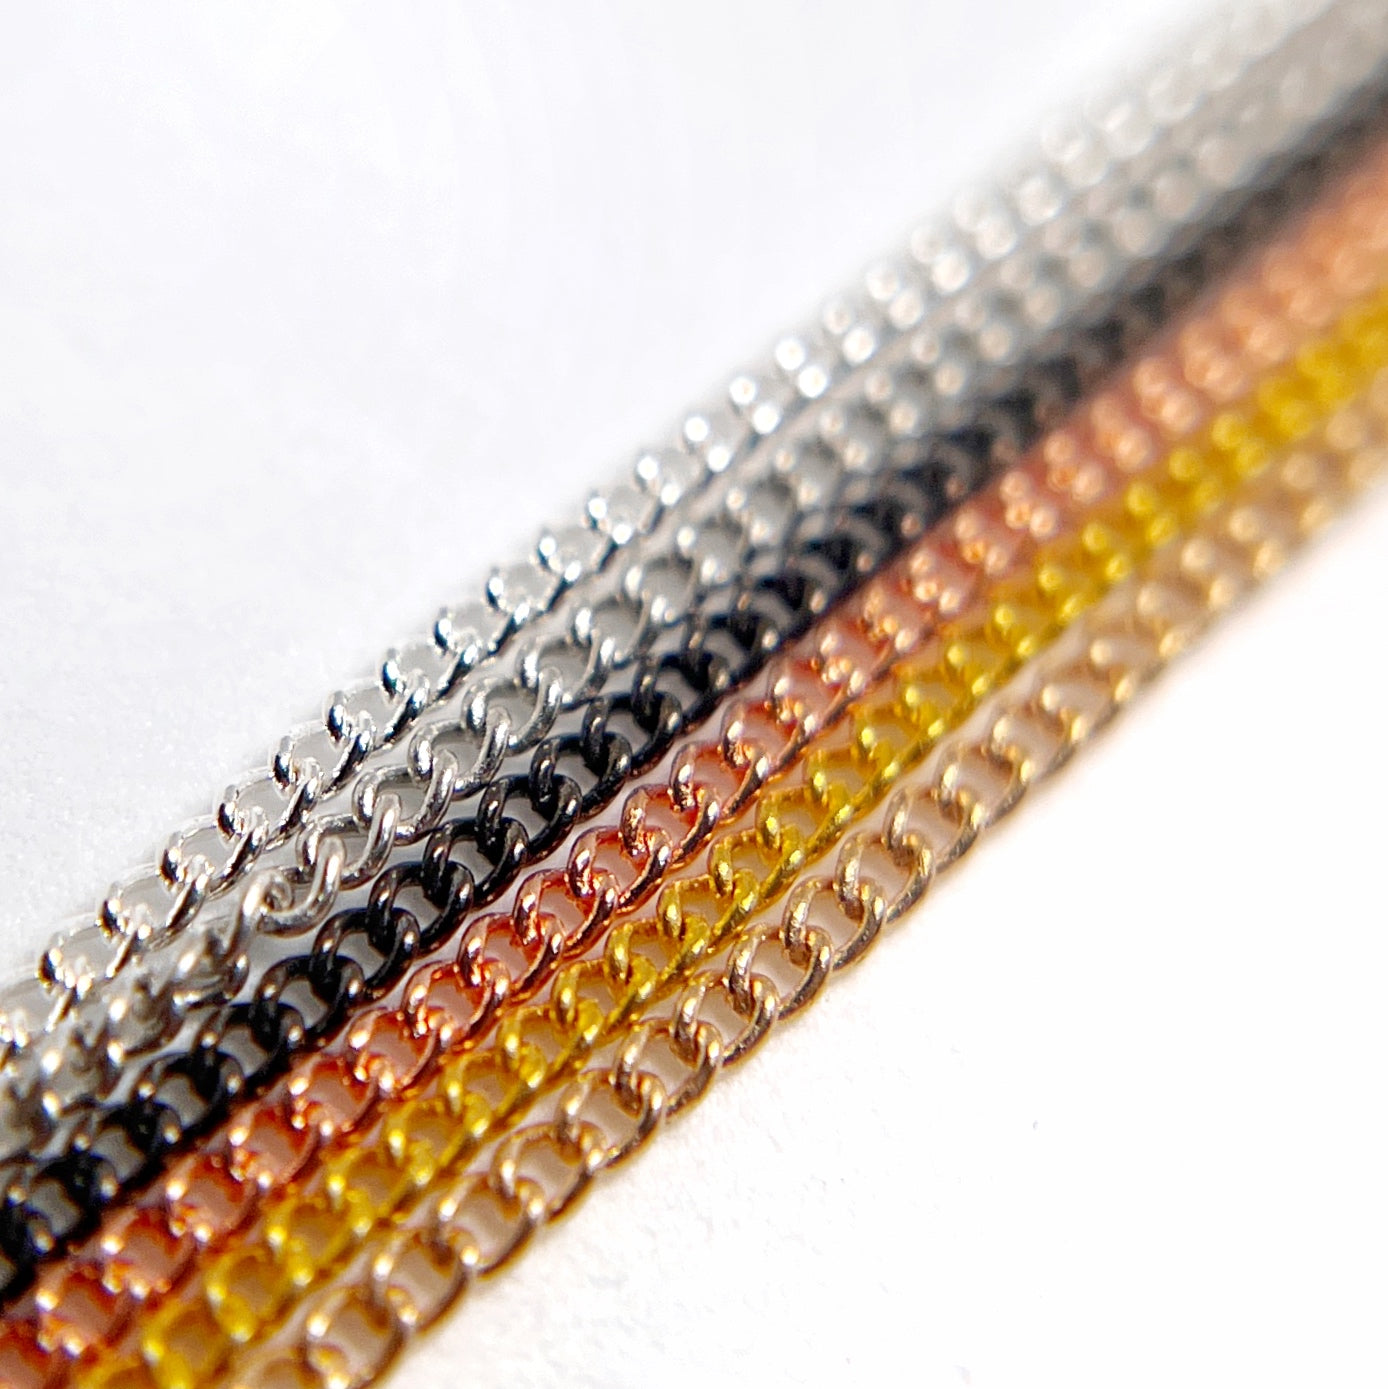 Close-Up of Multi-Color Nail Art Chains in metallic tones on White Background.